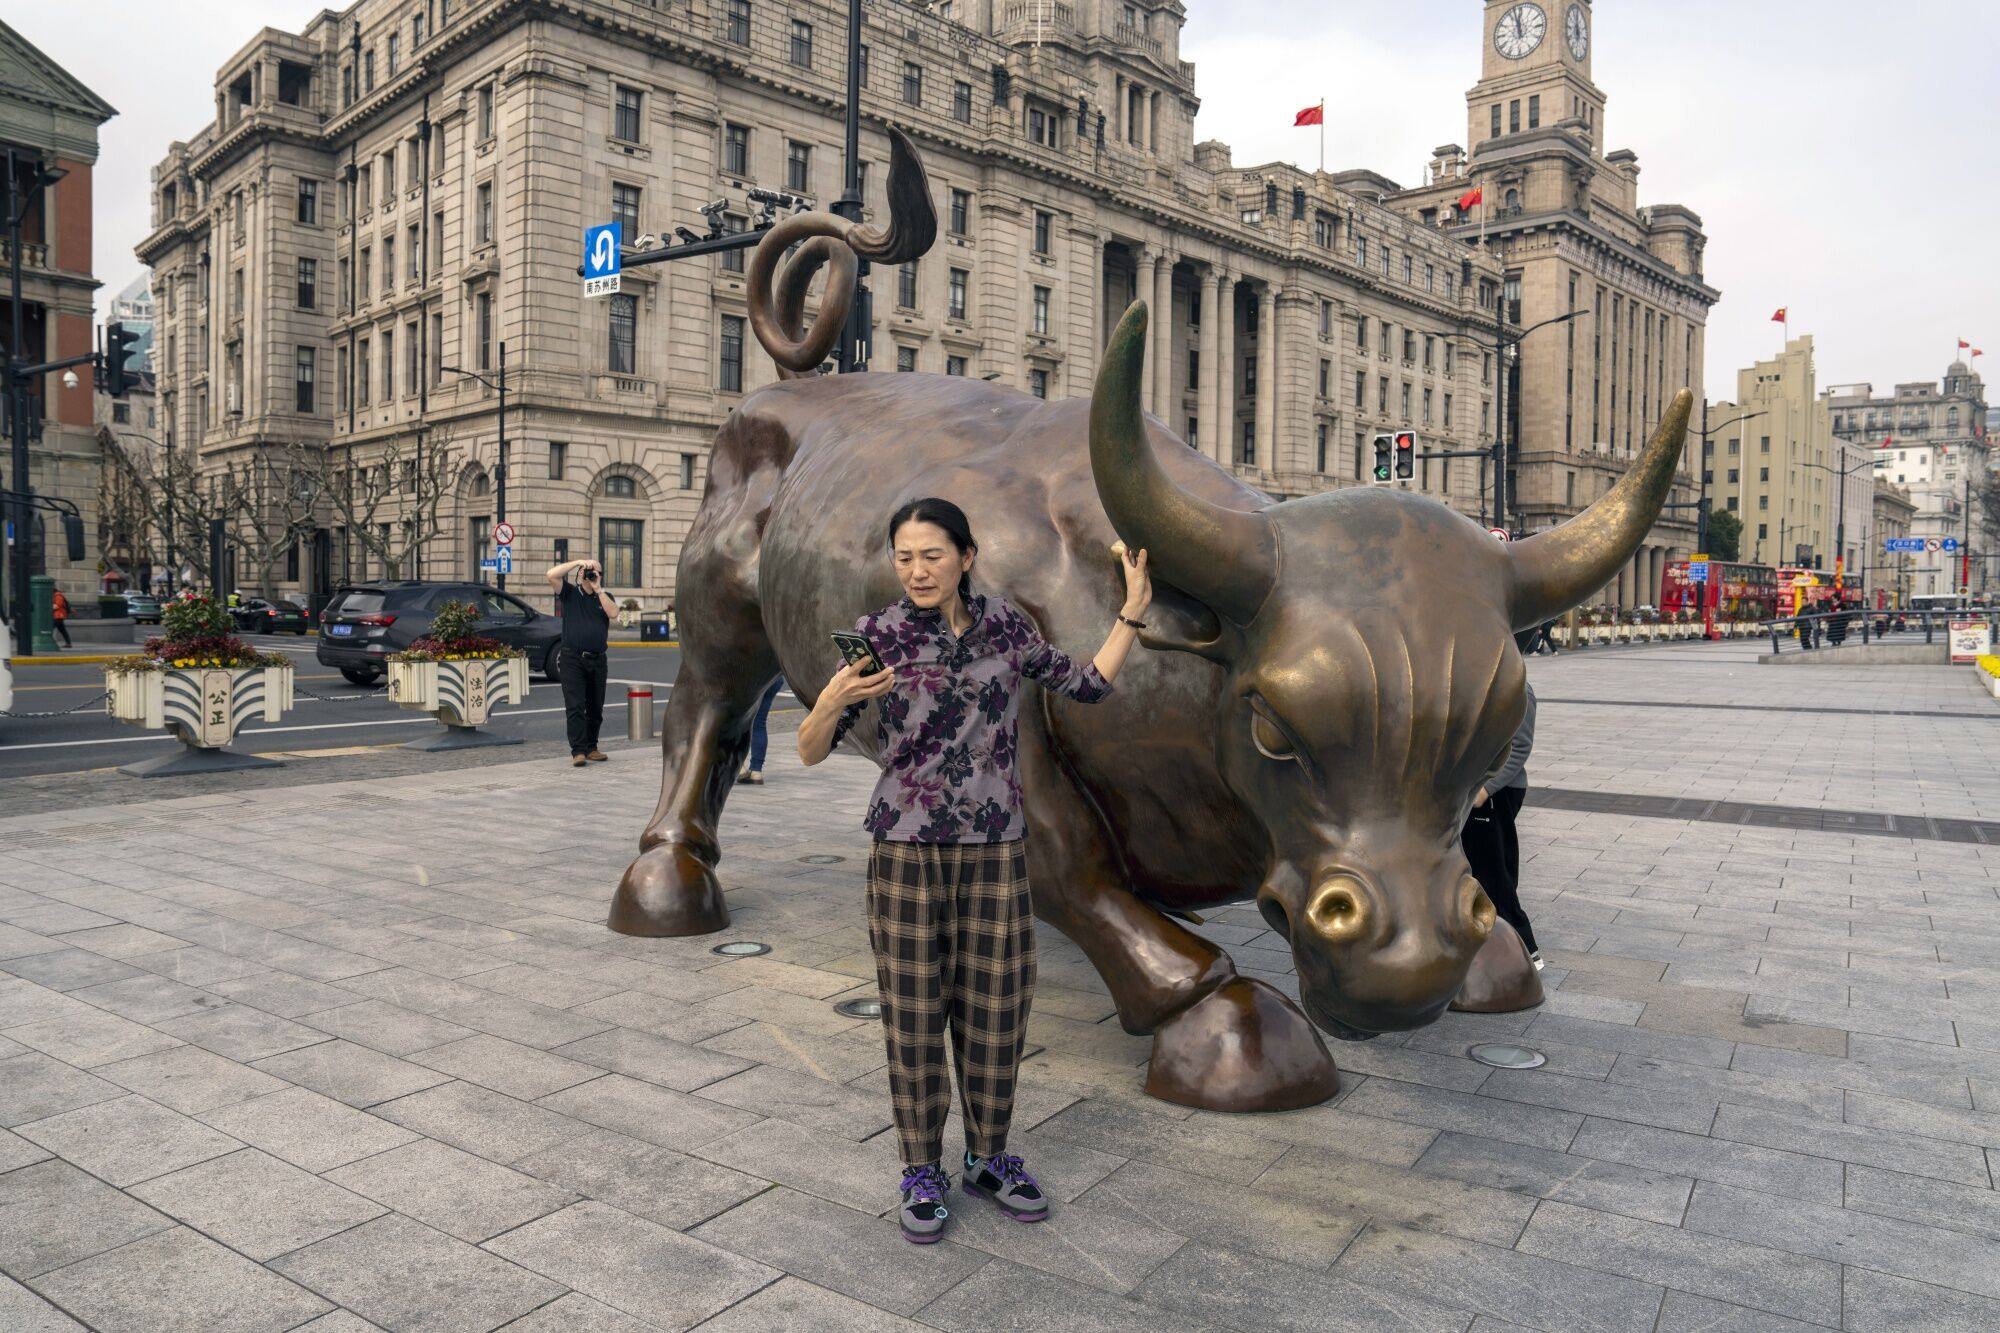 An AmCham survey in the fourth quarter of last year found that 90 per cent of American firms were not planning to decouple from China amid geopolitical trade tensions and market woes. Photo: Bloomberg